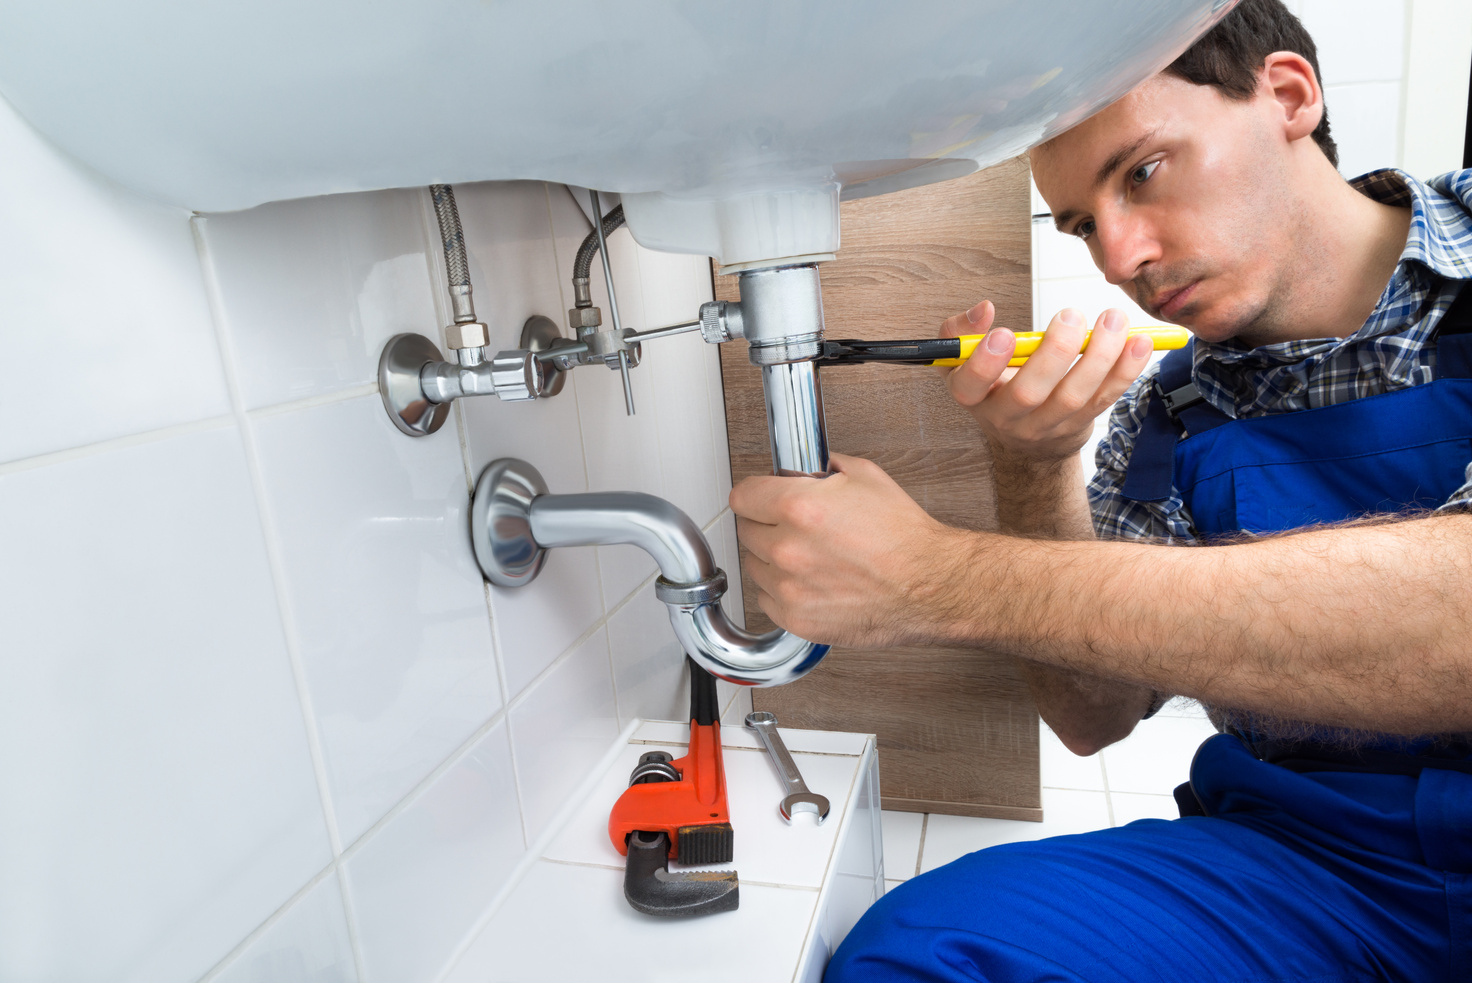 Plumber fixing sink pipes in a bathroom